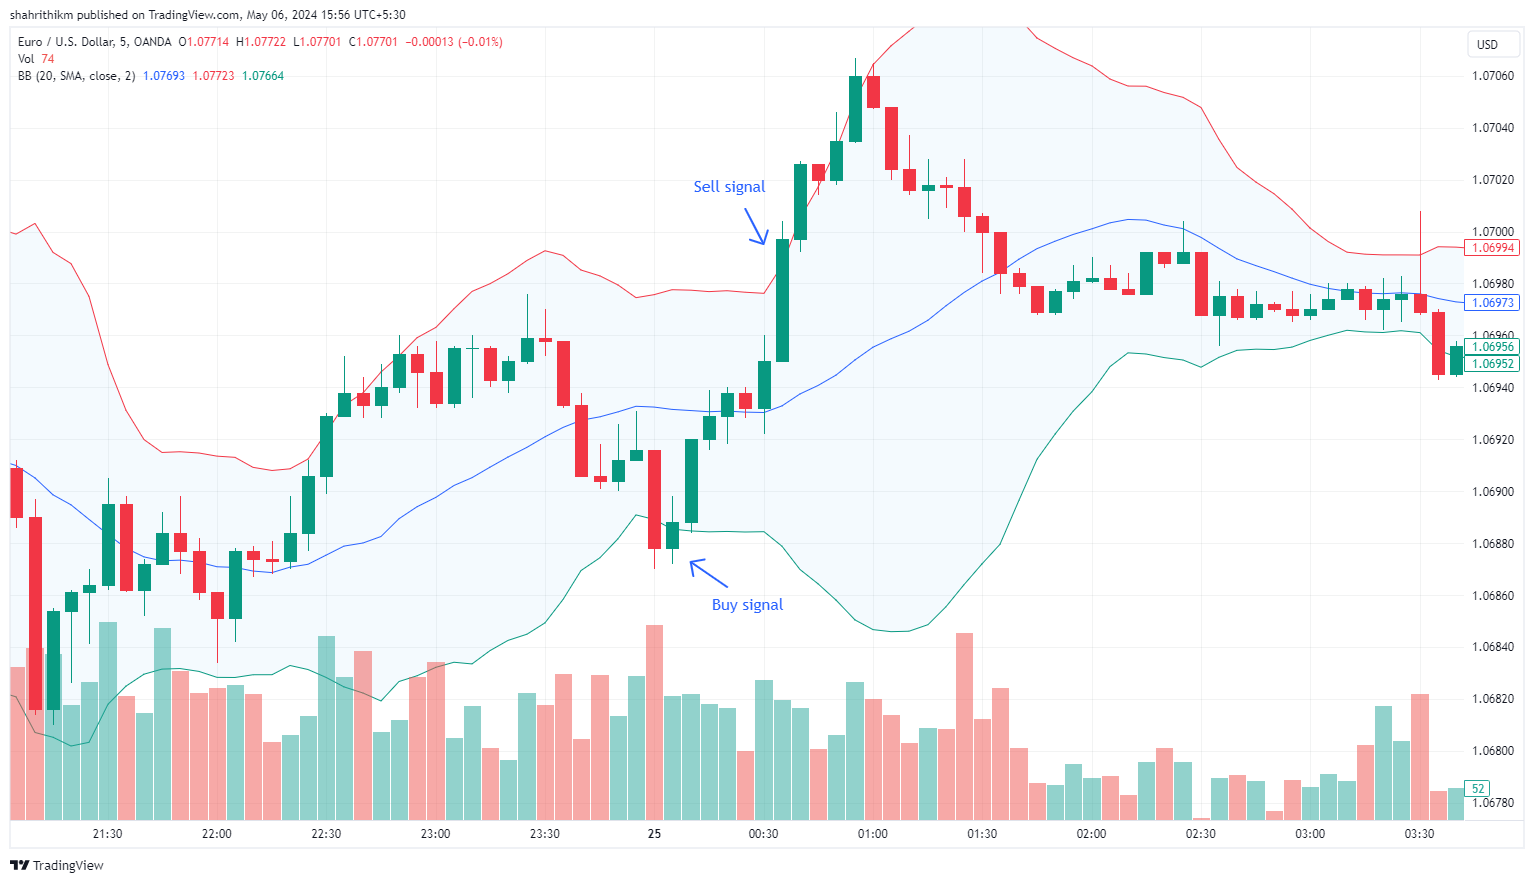 Bollinger band strategy